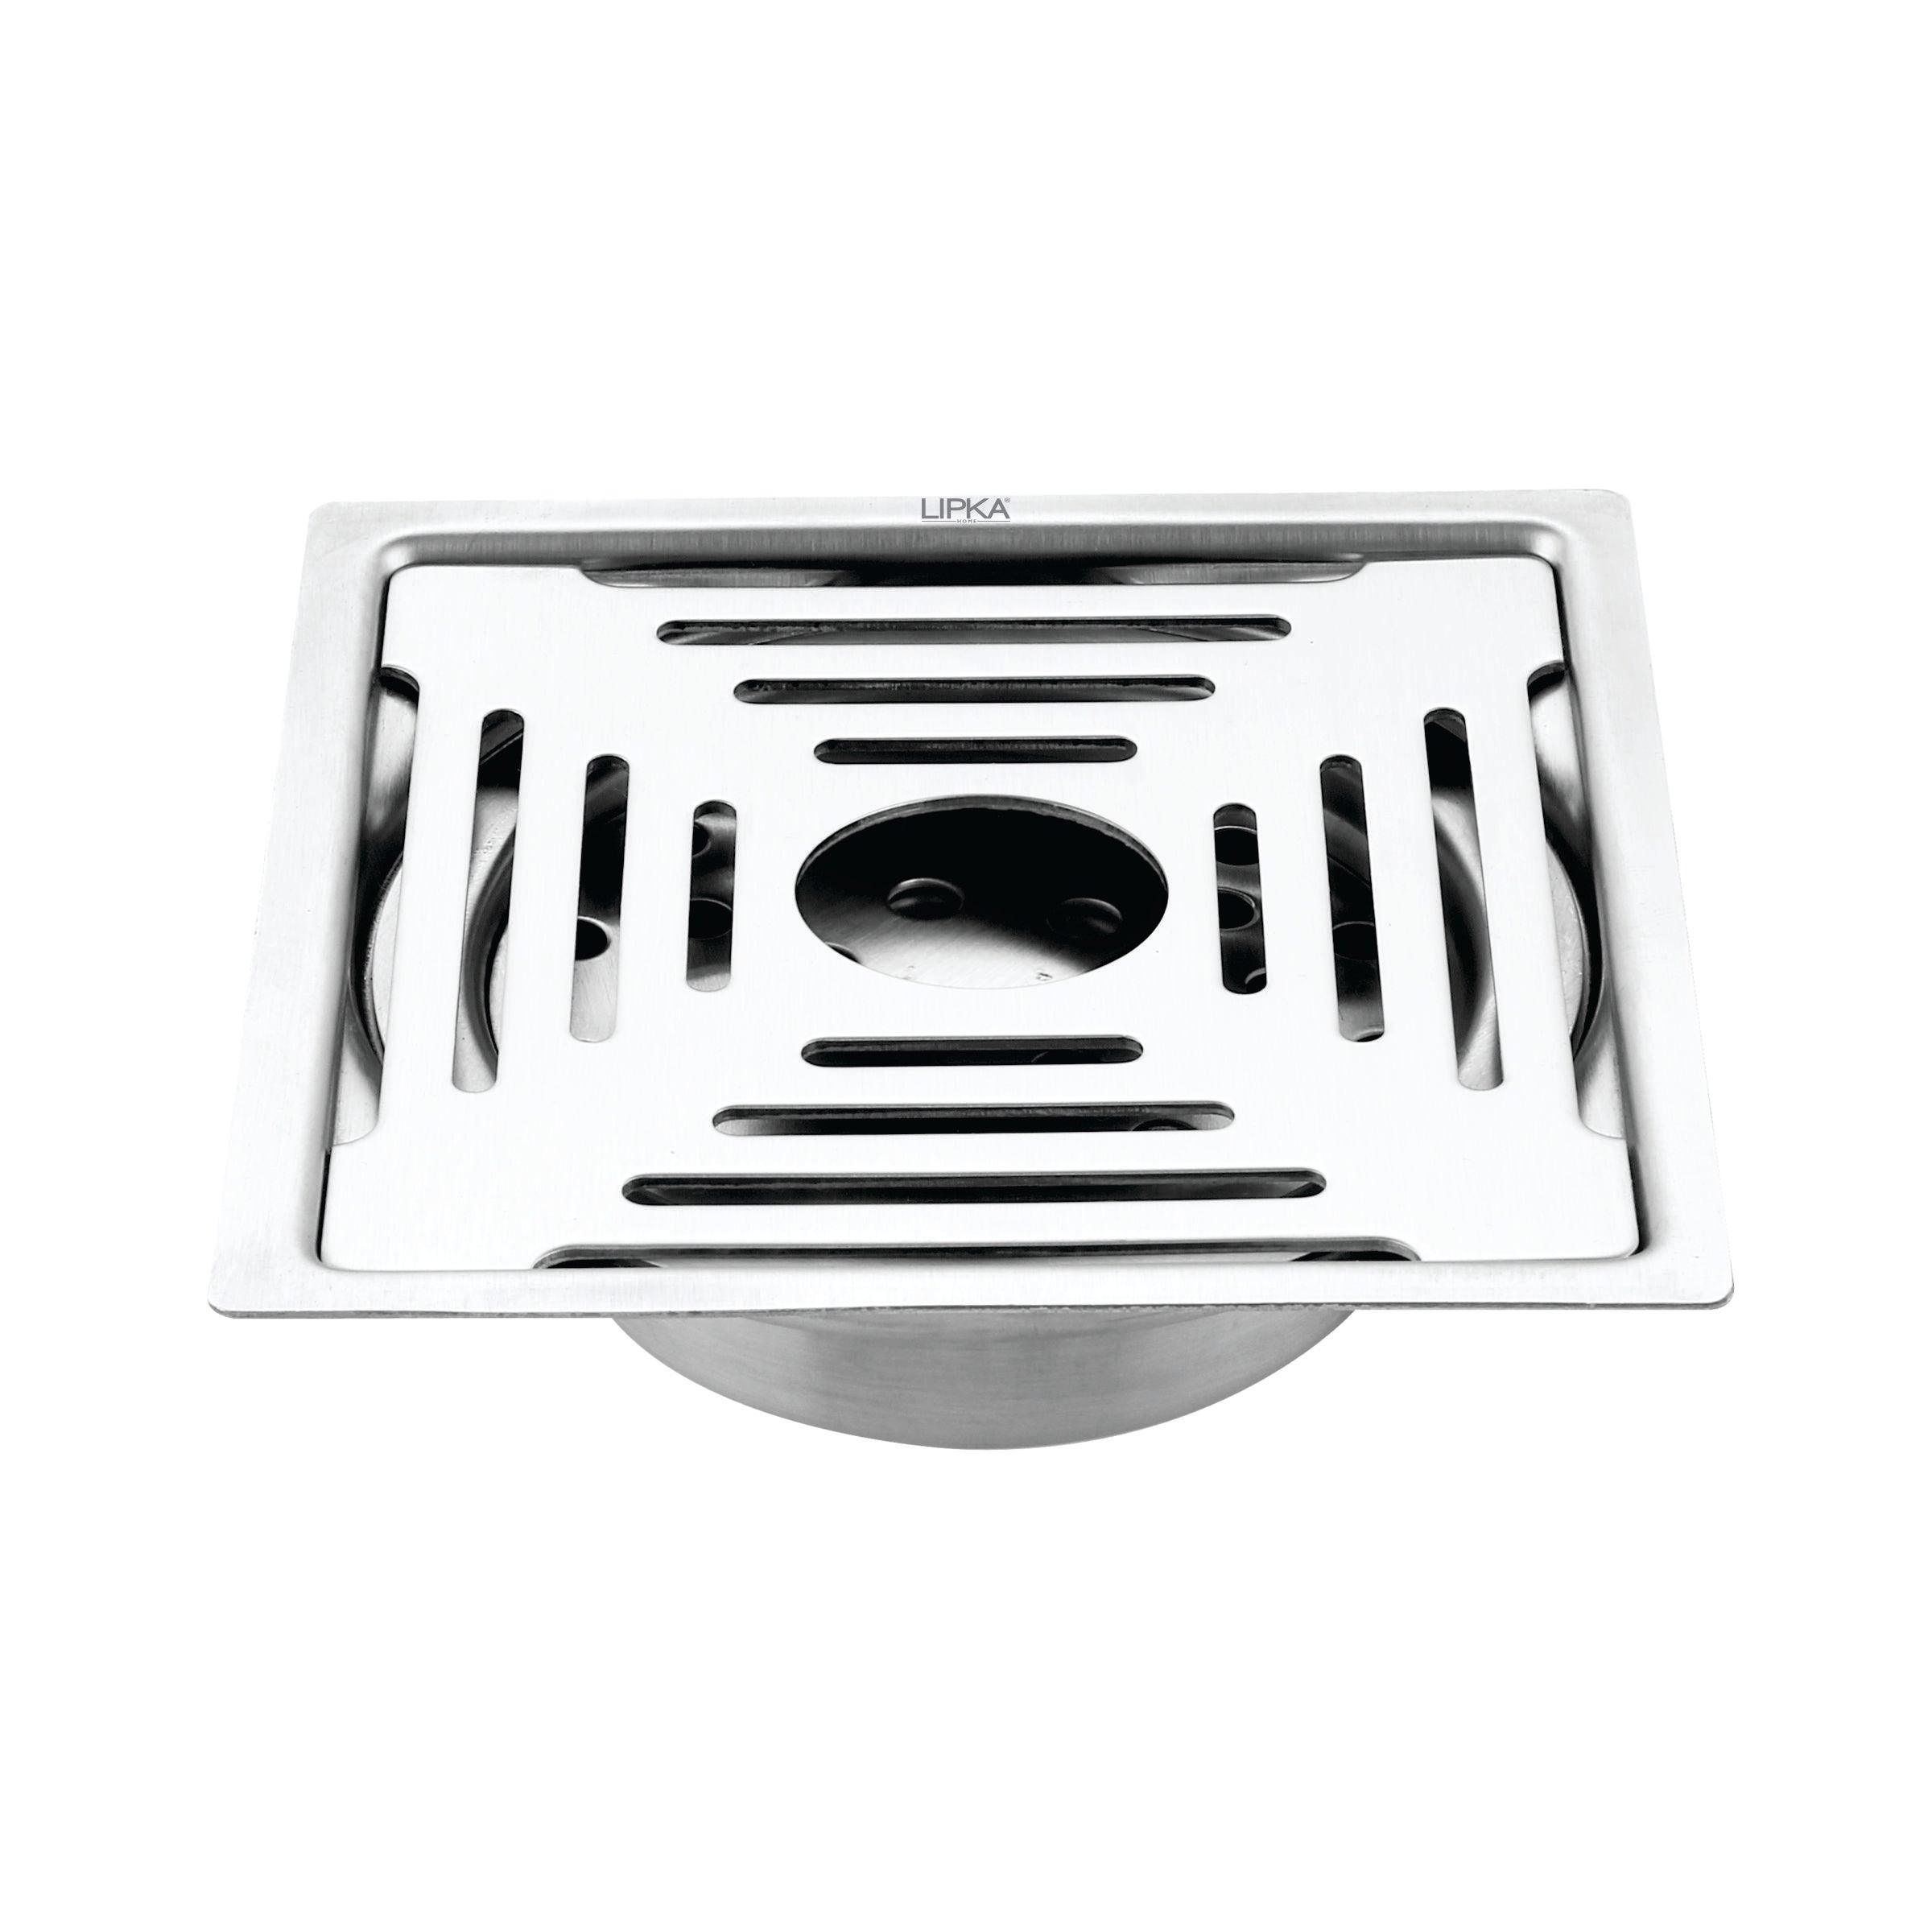 Green Exclusive Square Flat Cut Floor Drain (6 x 6 Inches) with Hole and Cockroach Trap